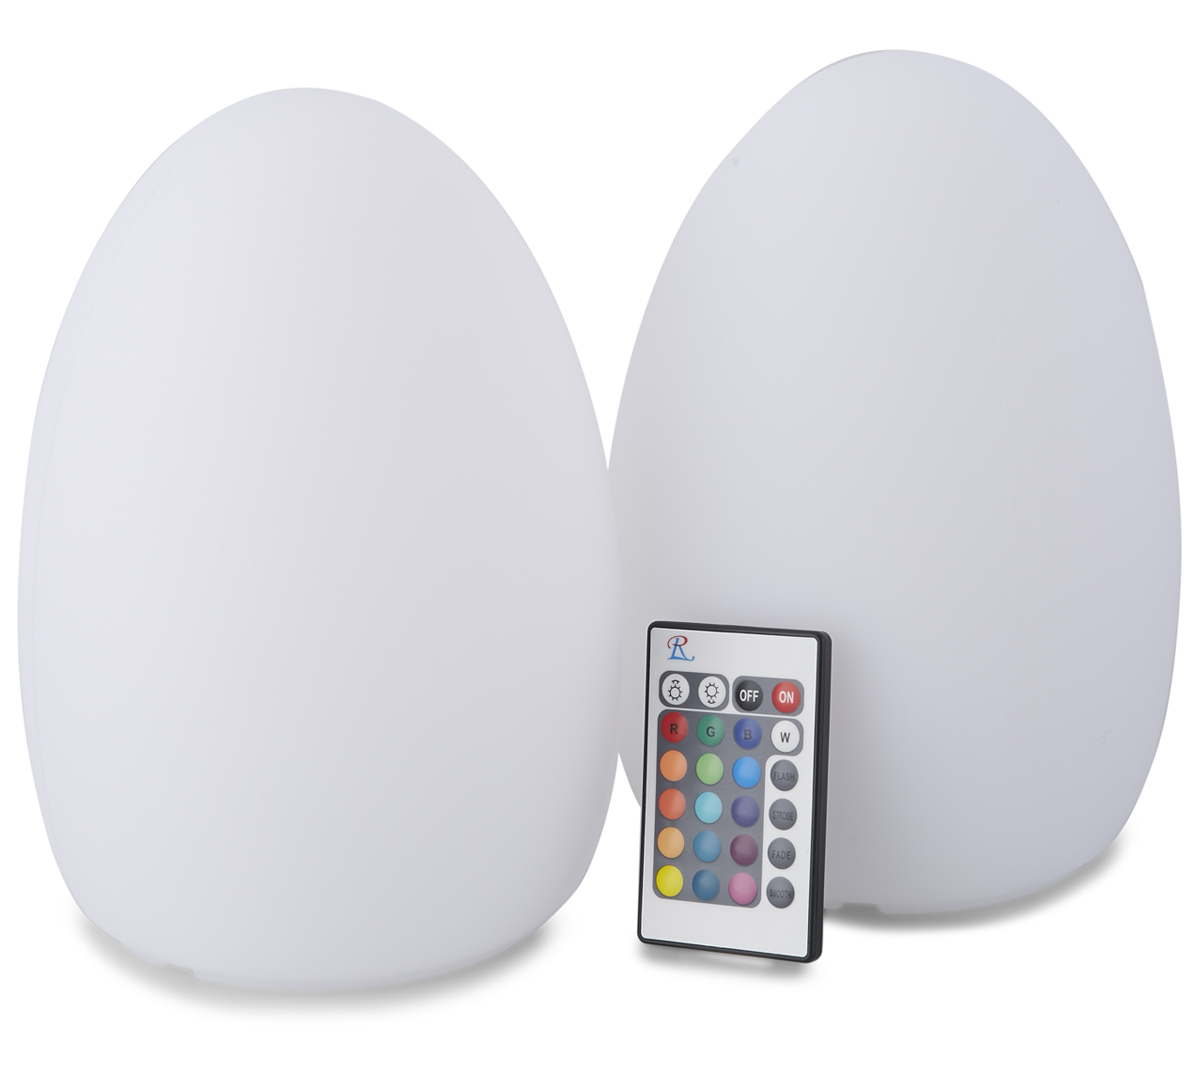  Living Space Led Egg Light 2 Pieces Pack